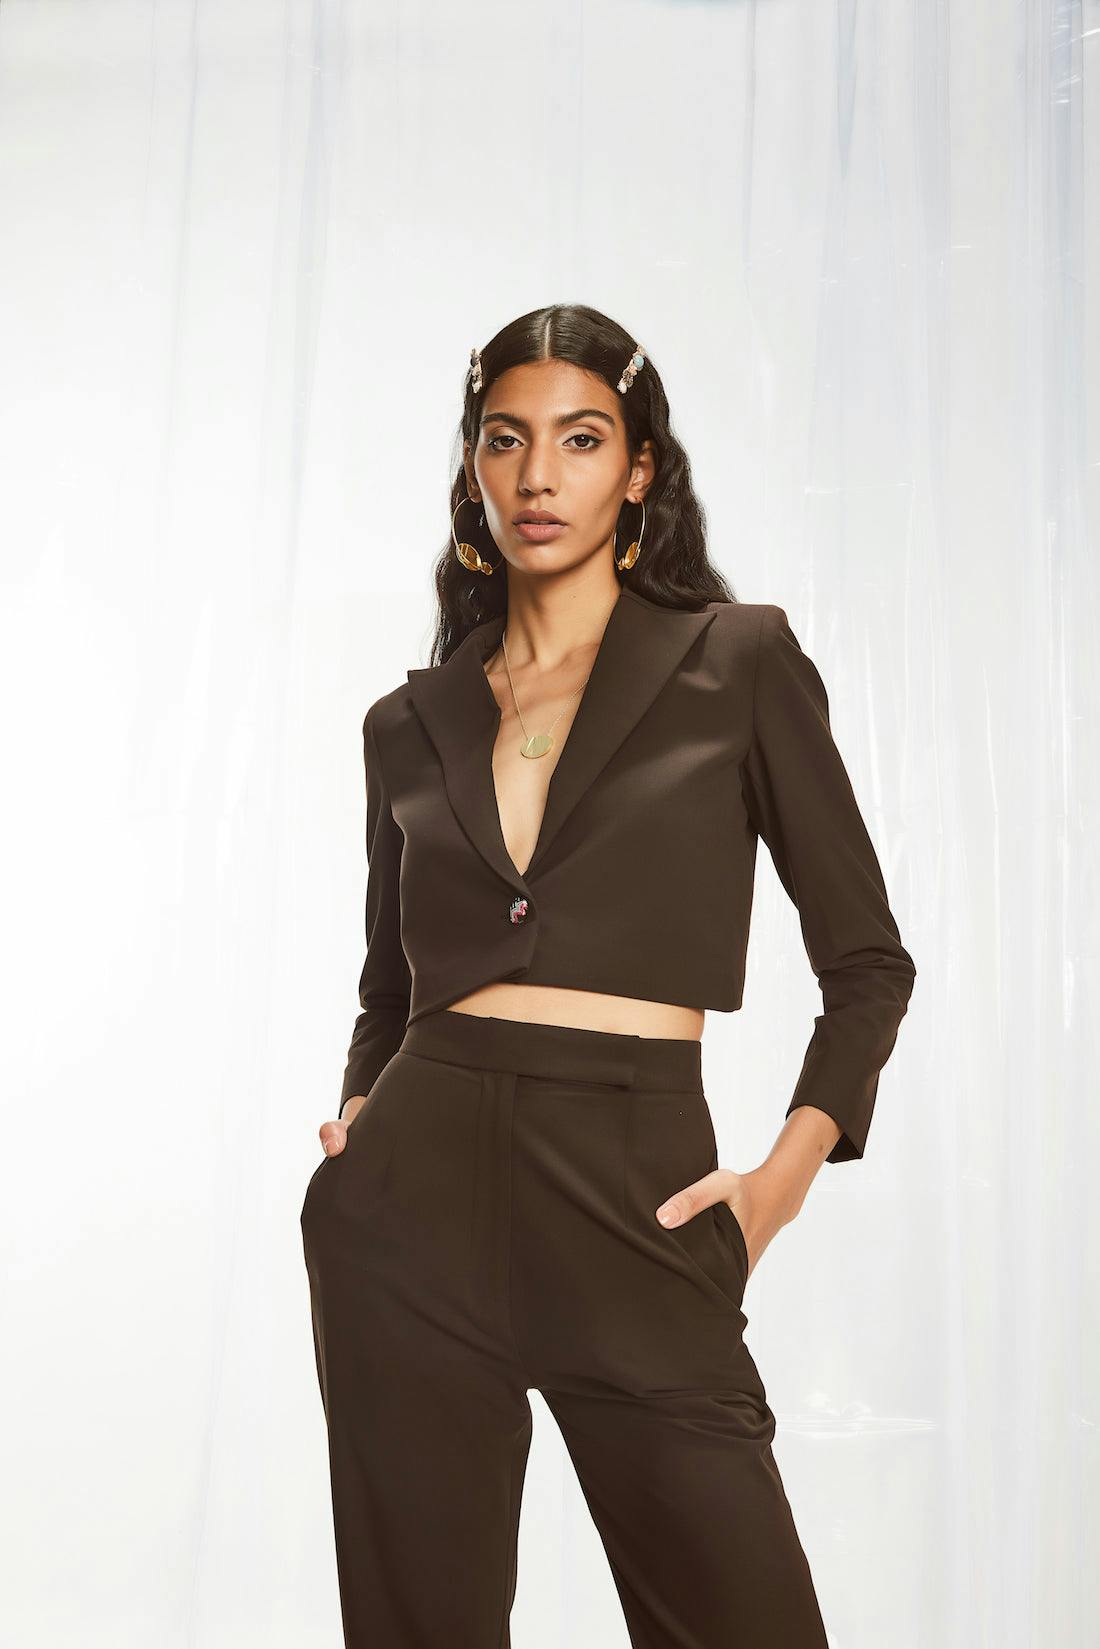 Statement Tailored Double-Breasted Blazer, a product by Pocketful Of Cherrie